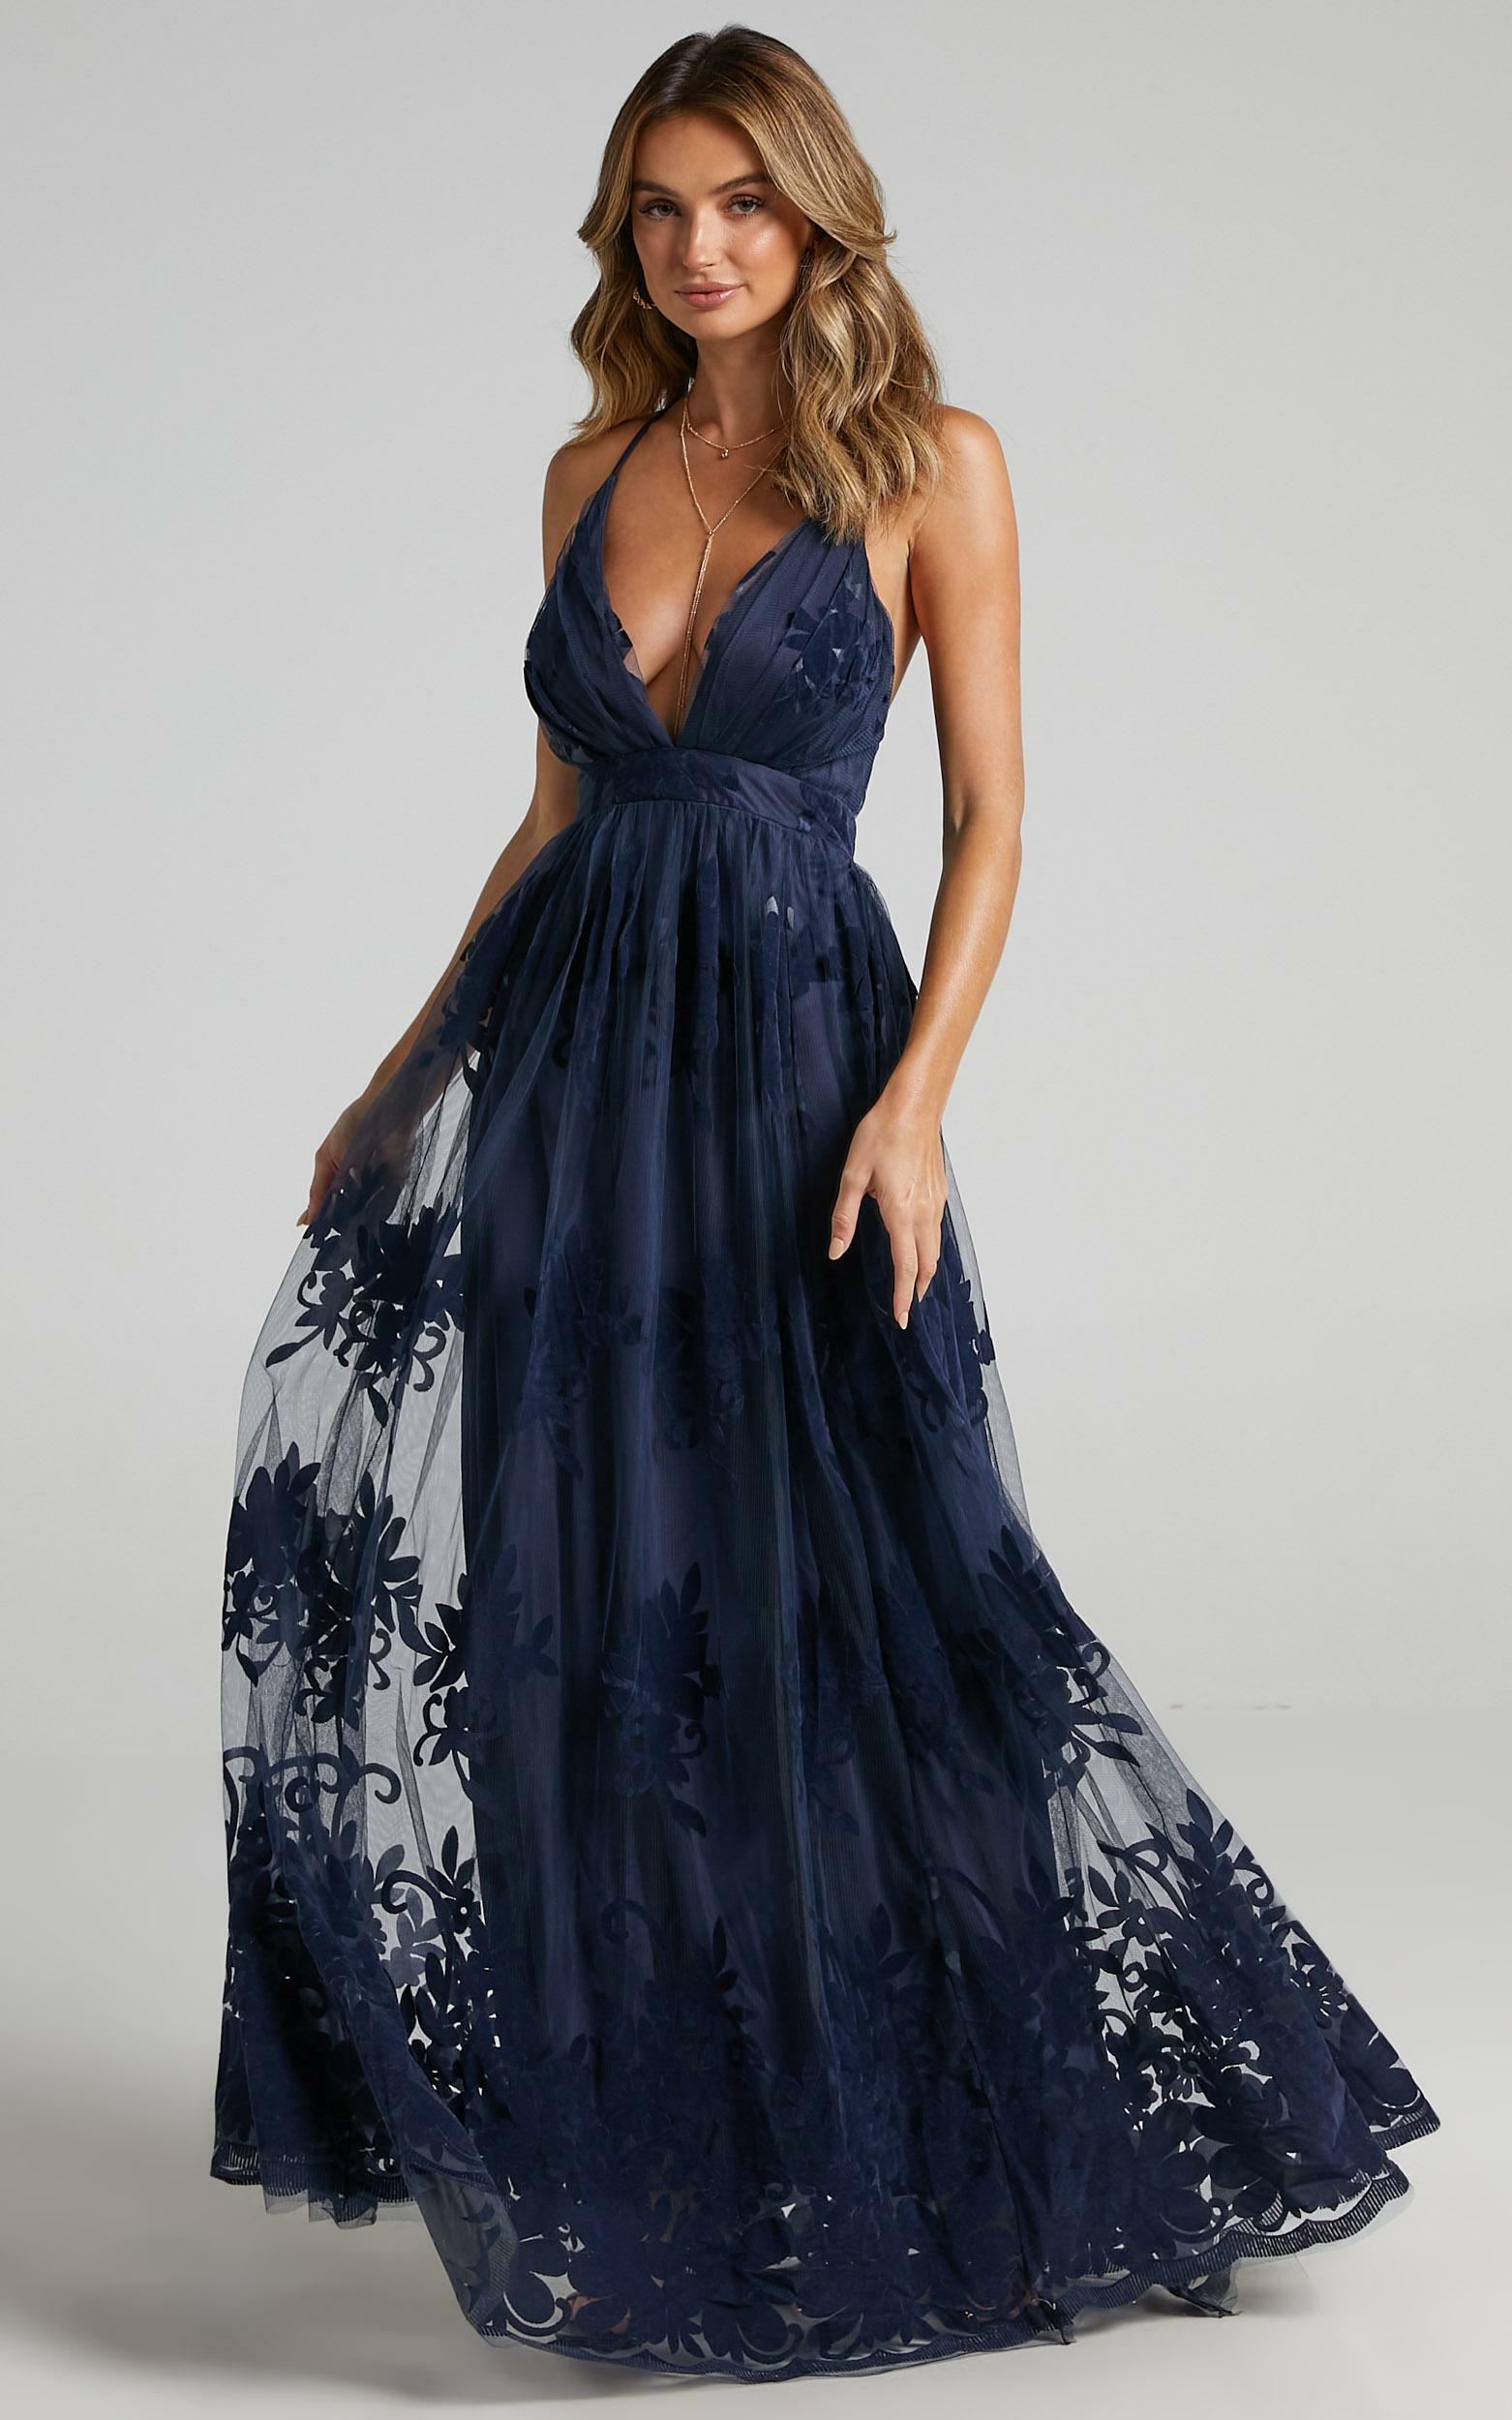 Promenade Maxi Dress in Navy - 08, NVY1, hi-res image number null